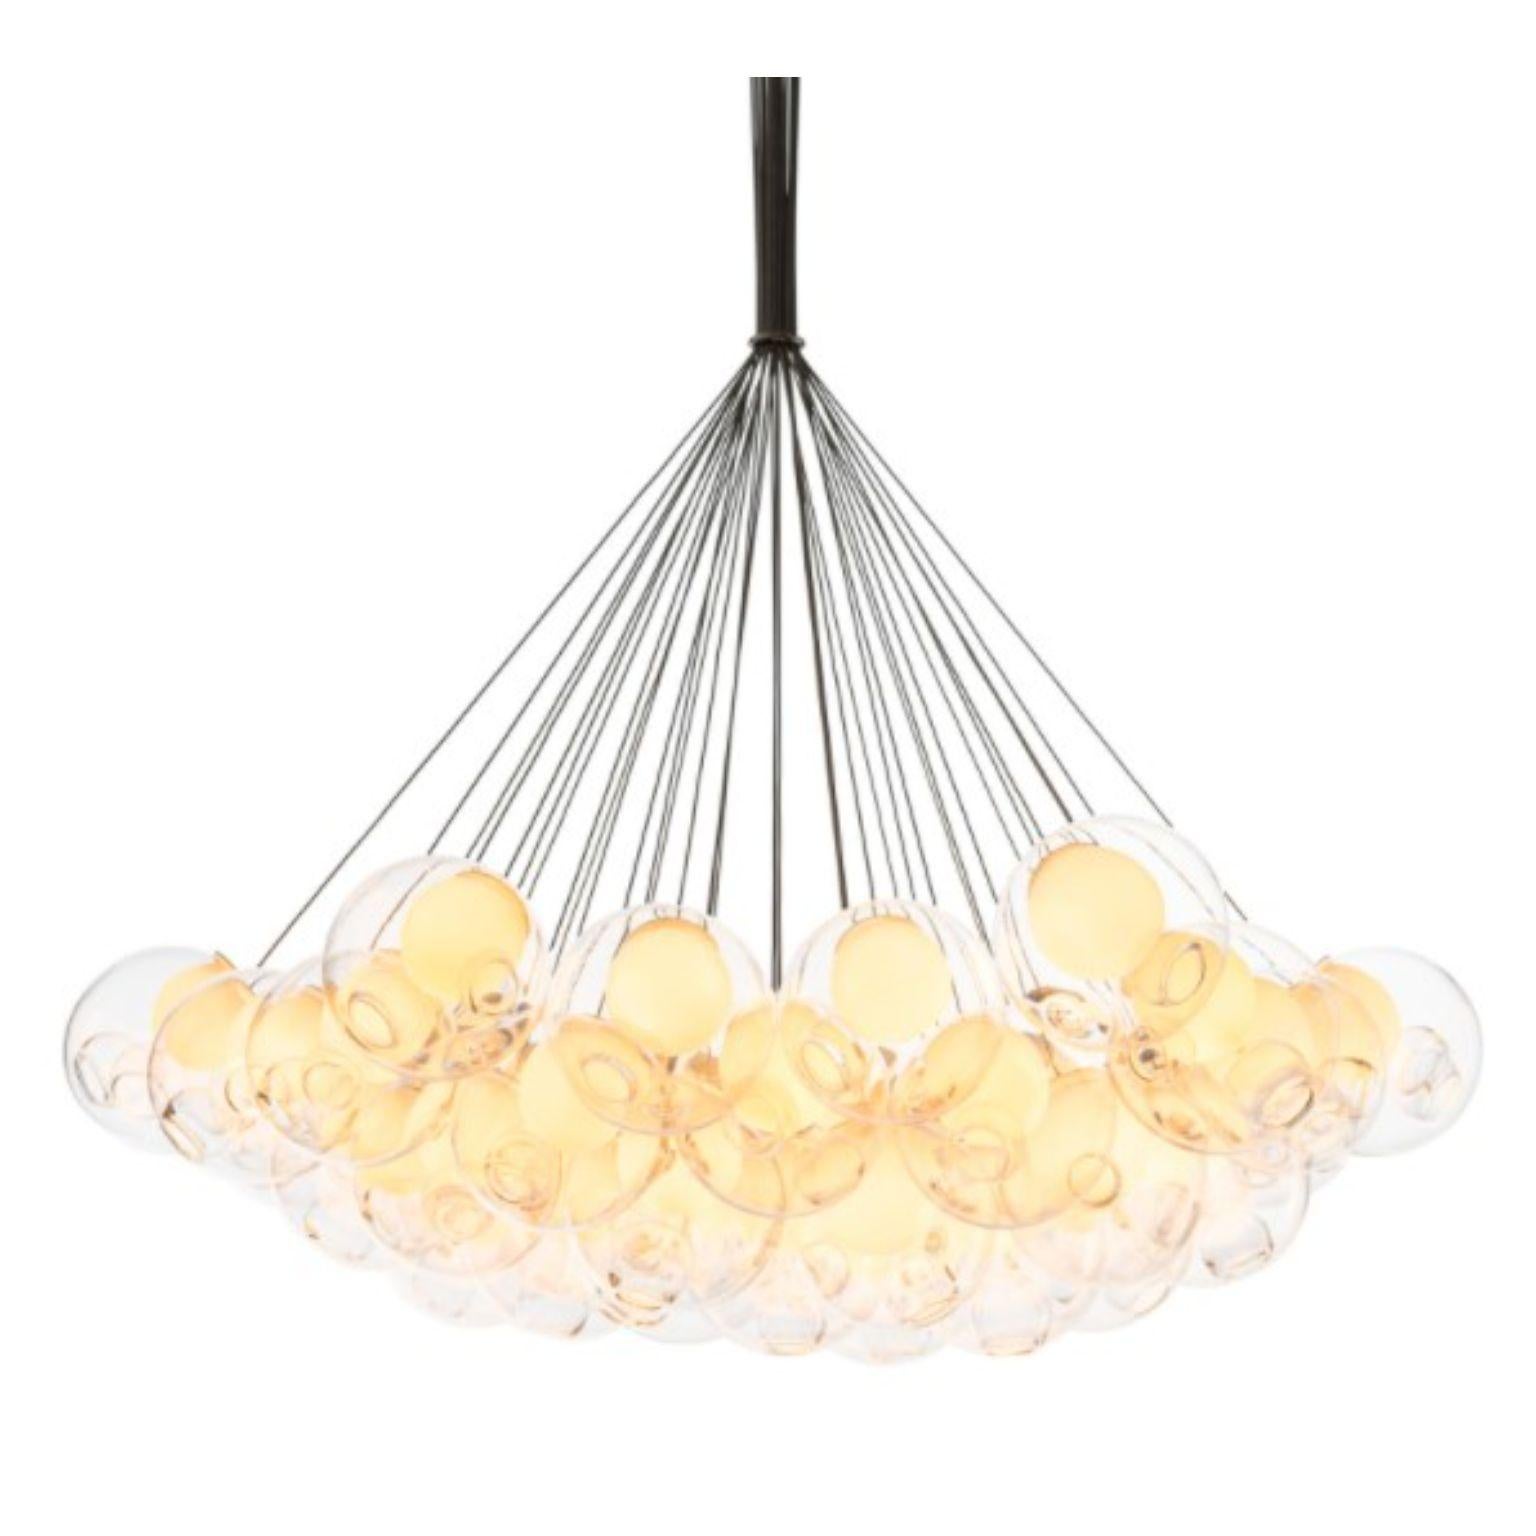 28.37 Pendant by Bocci
Dimensions: D 105 x H 300 cm
Materials: white powder coated round canopy
Weight: 71.5 kg
Also available in different dimensions.

All our lamps can be wired according to each country. If sold to the USA it will be wired